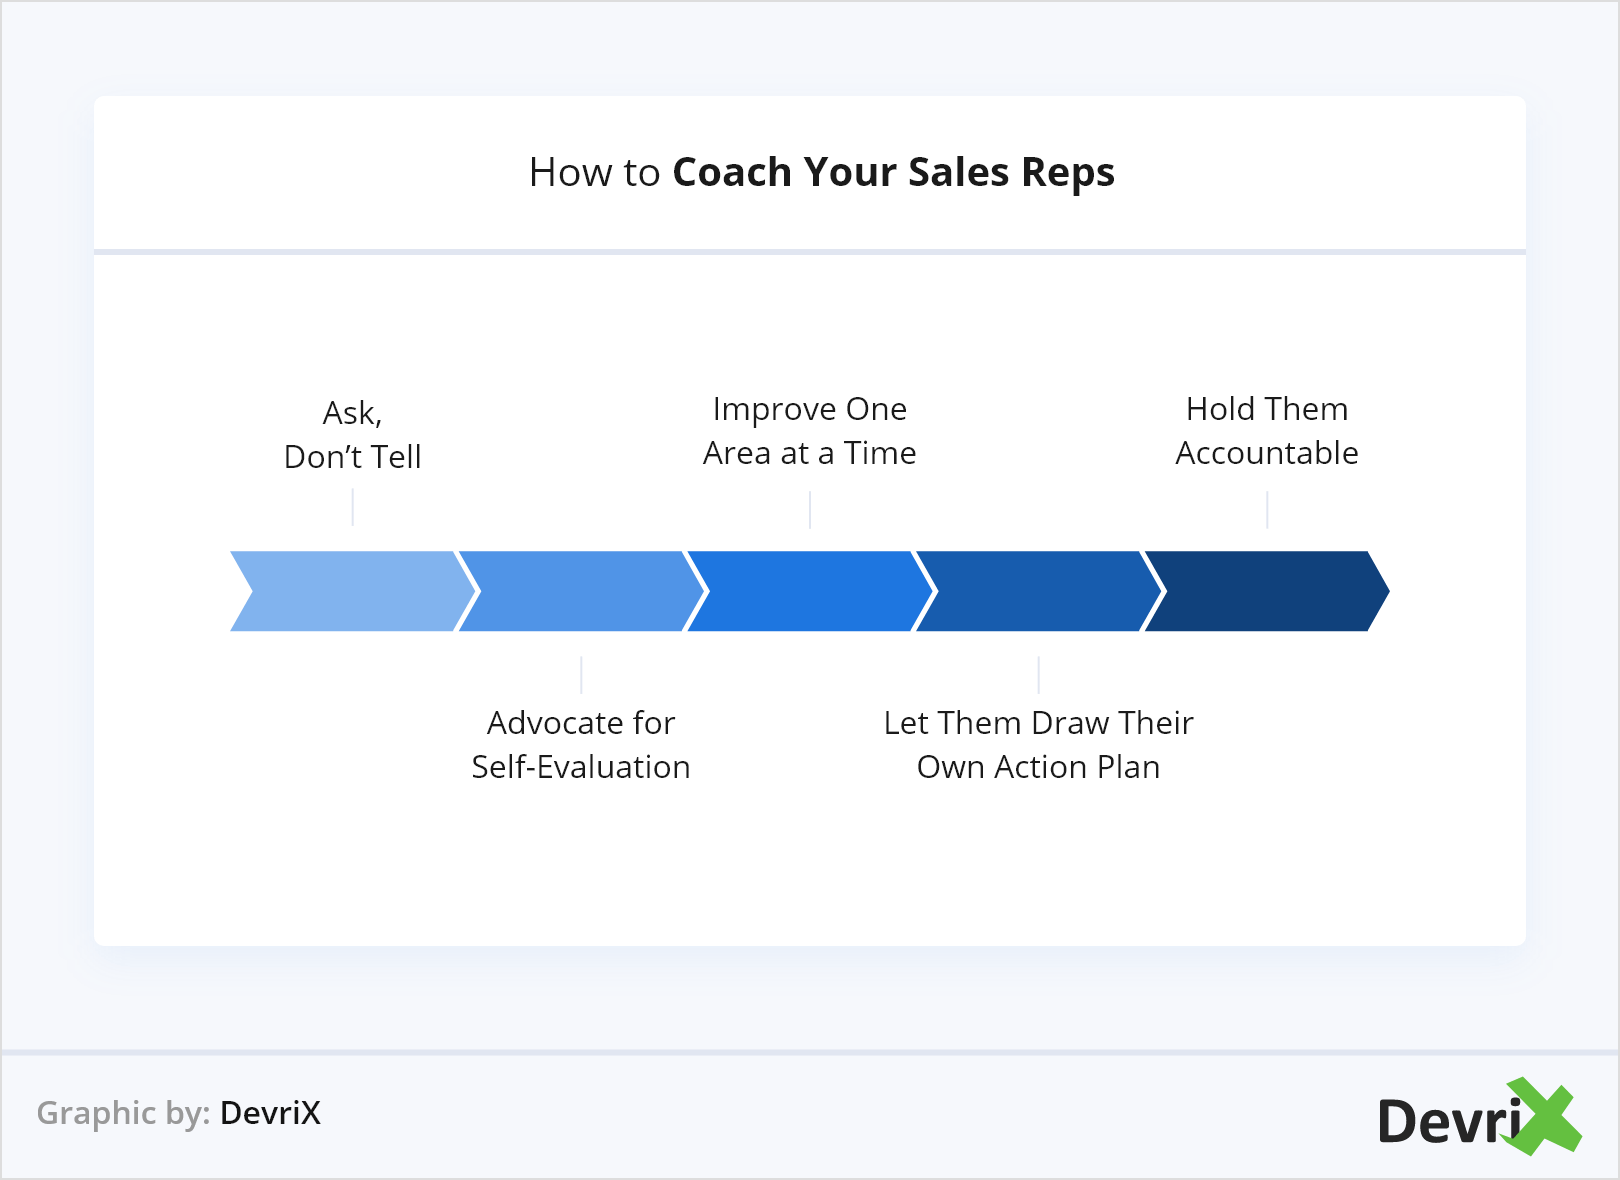 How to Coach Your Sales Reps